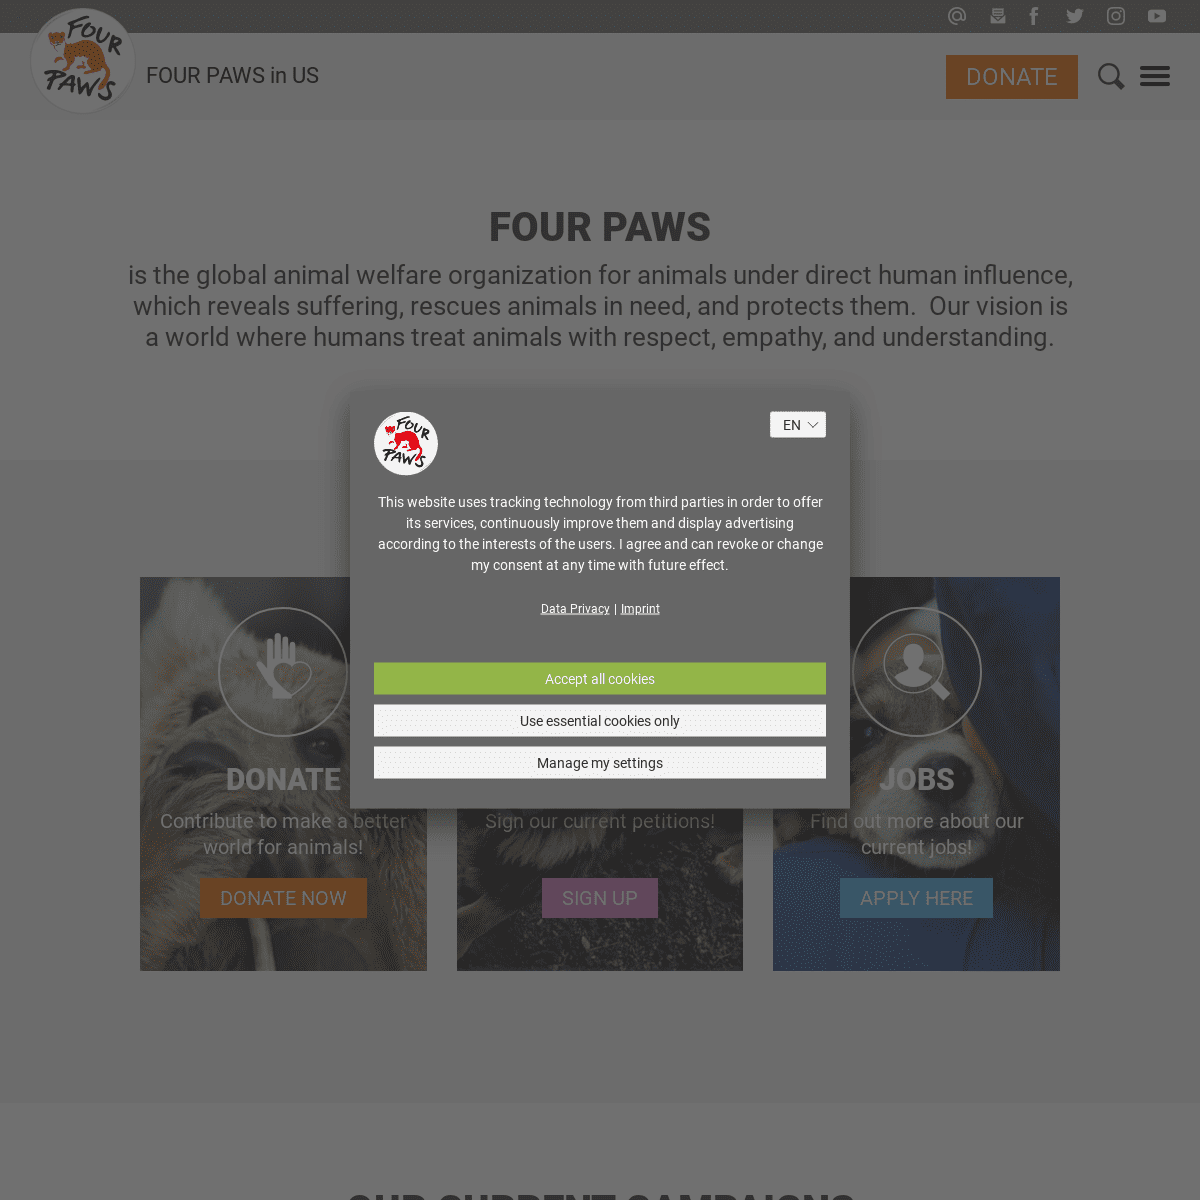 A complete backup of https://four-paws.us